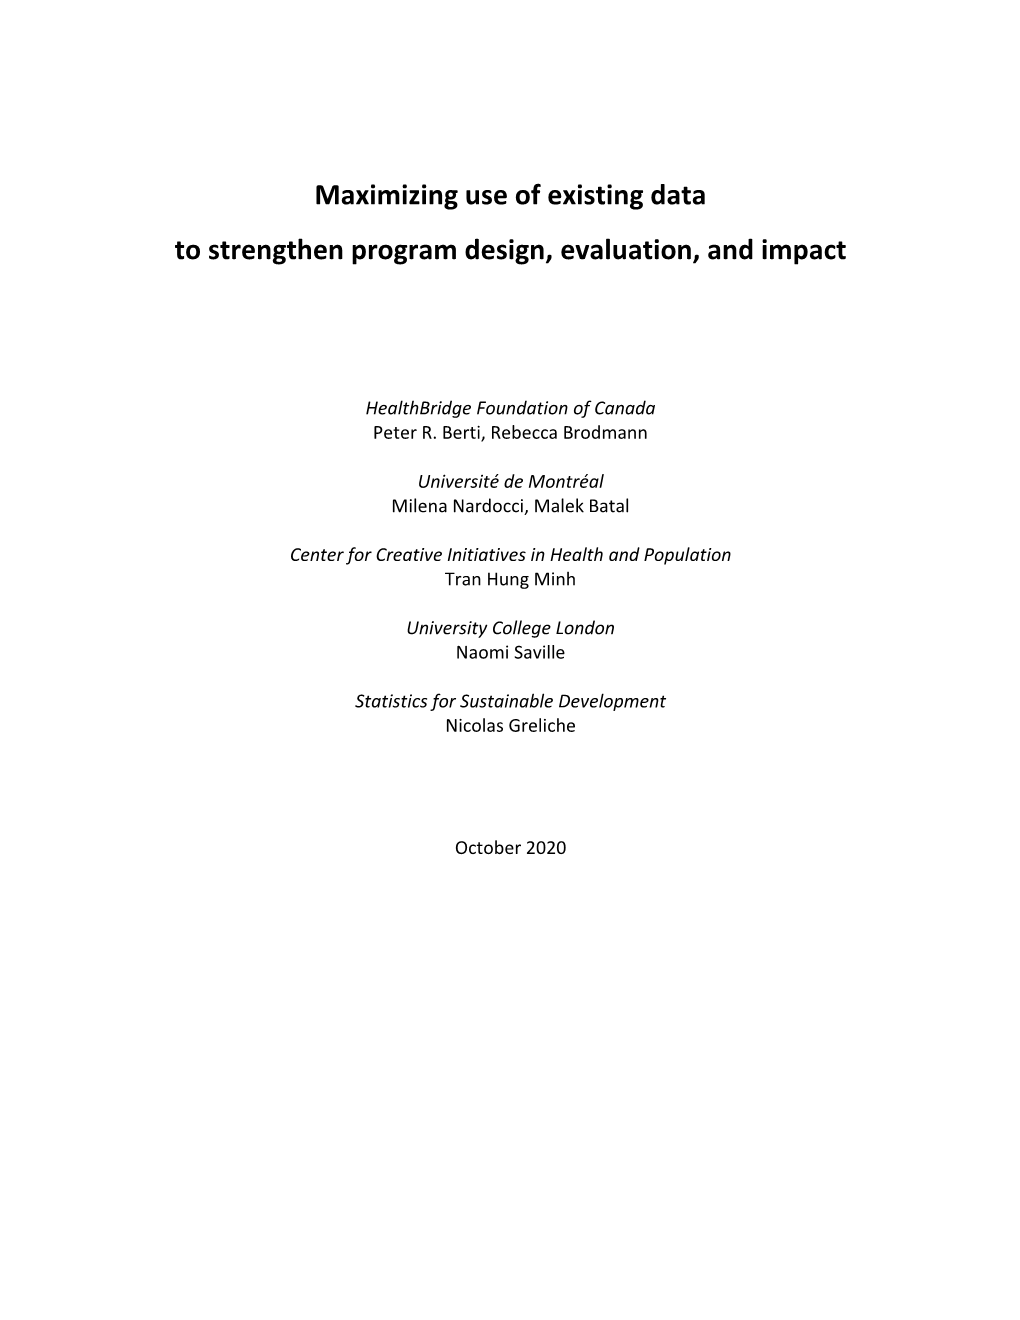 Final Report: Maximizing Use of Existing Data to Strengthen Program